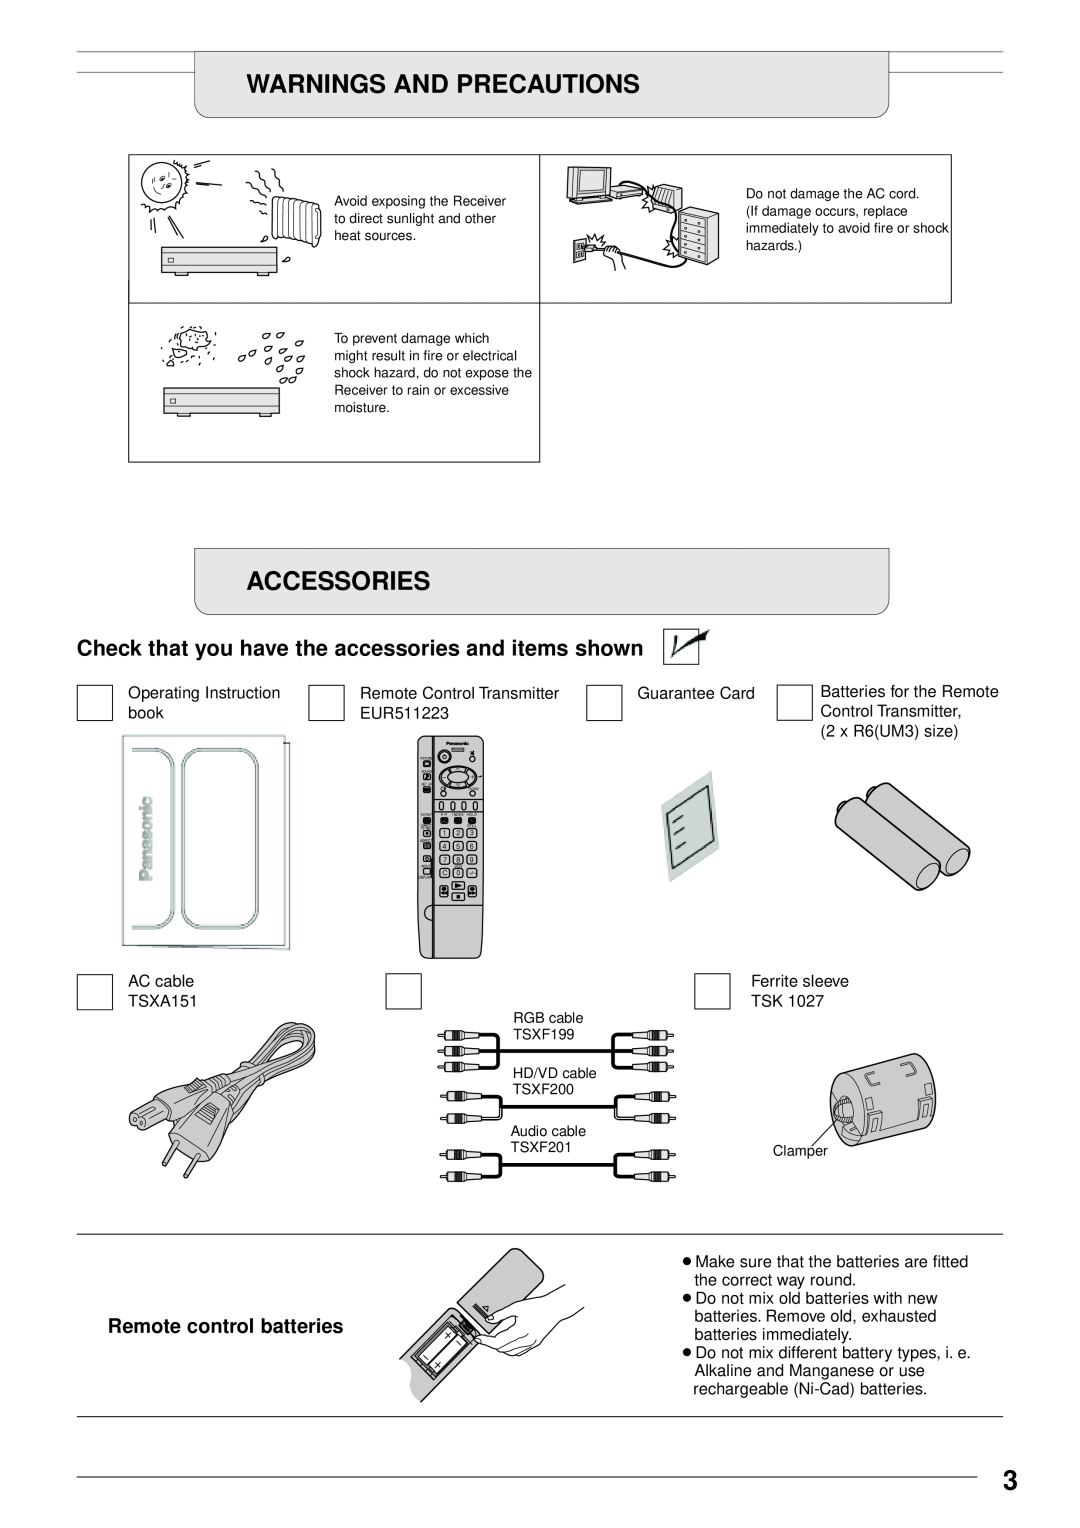 Panasonic TU-PTA100E manual Accessories, Check that you have the accessories and items shown, Remote control batteries 